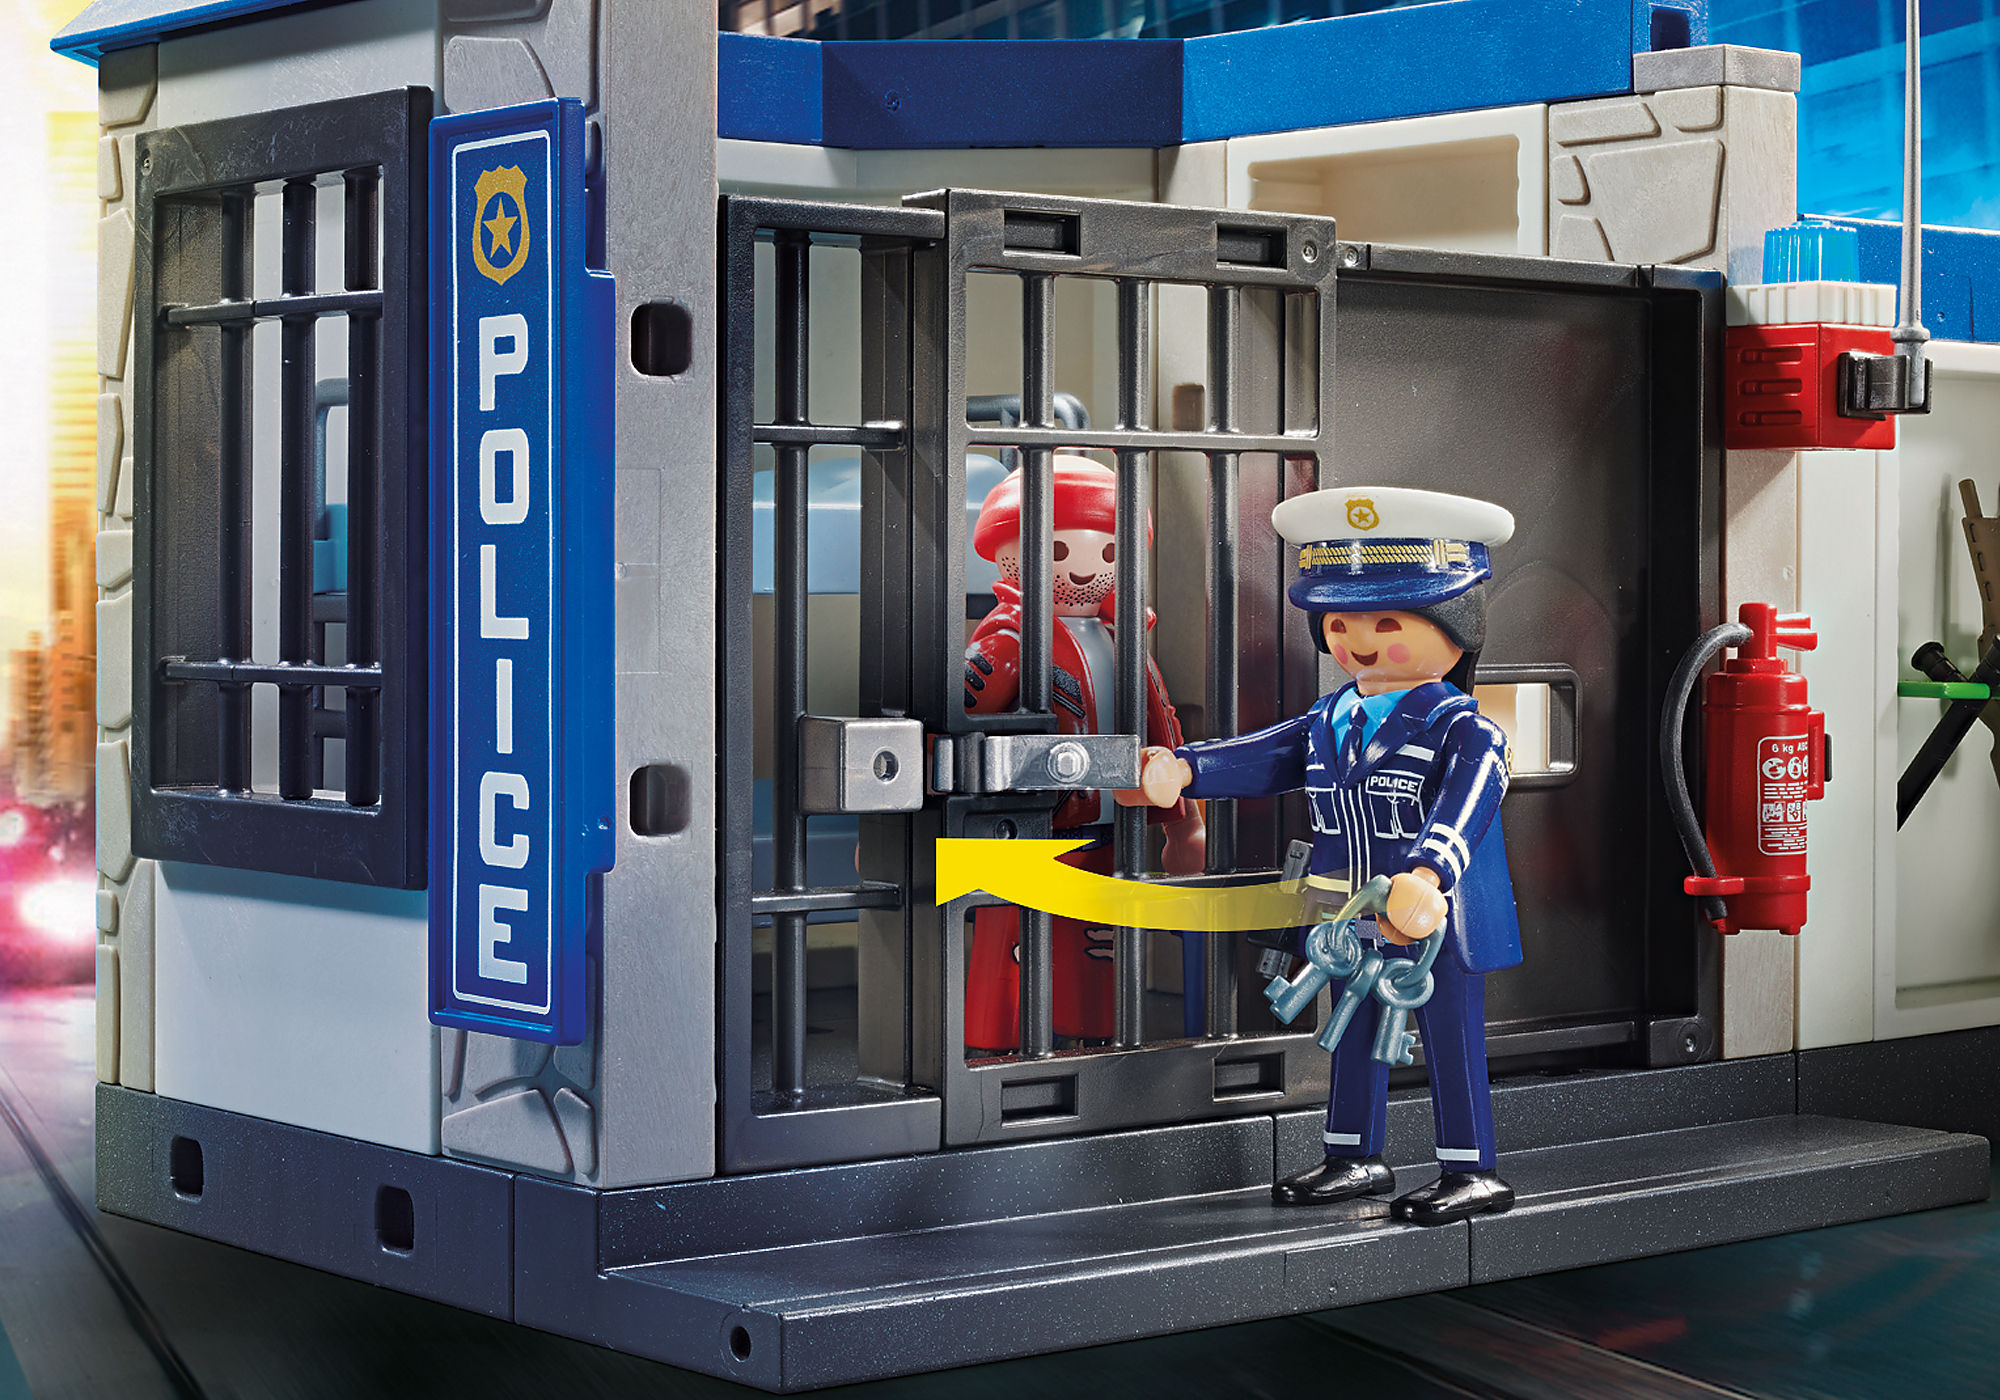 Police Command Center with Prison Playmobil Playset